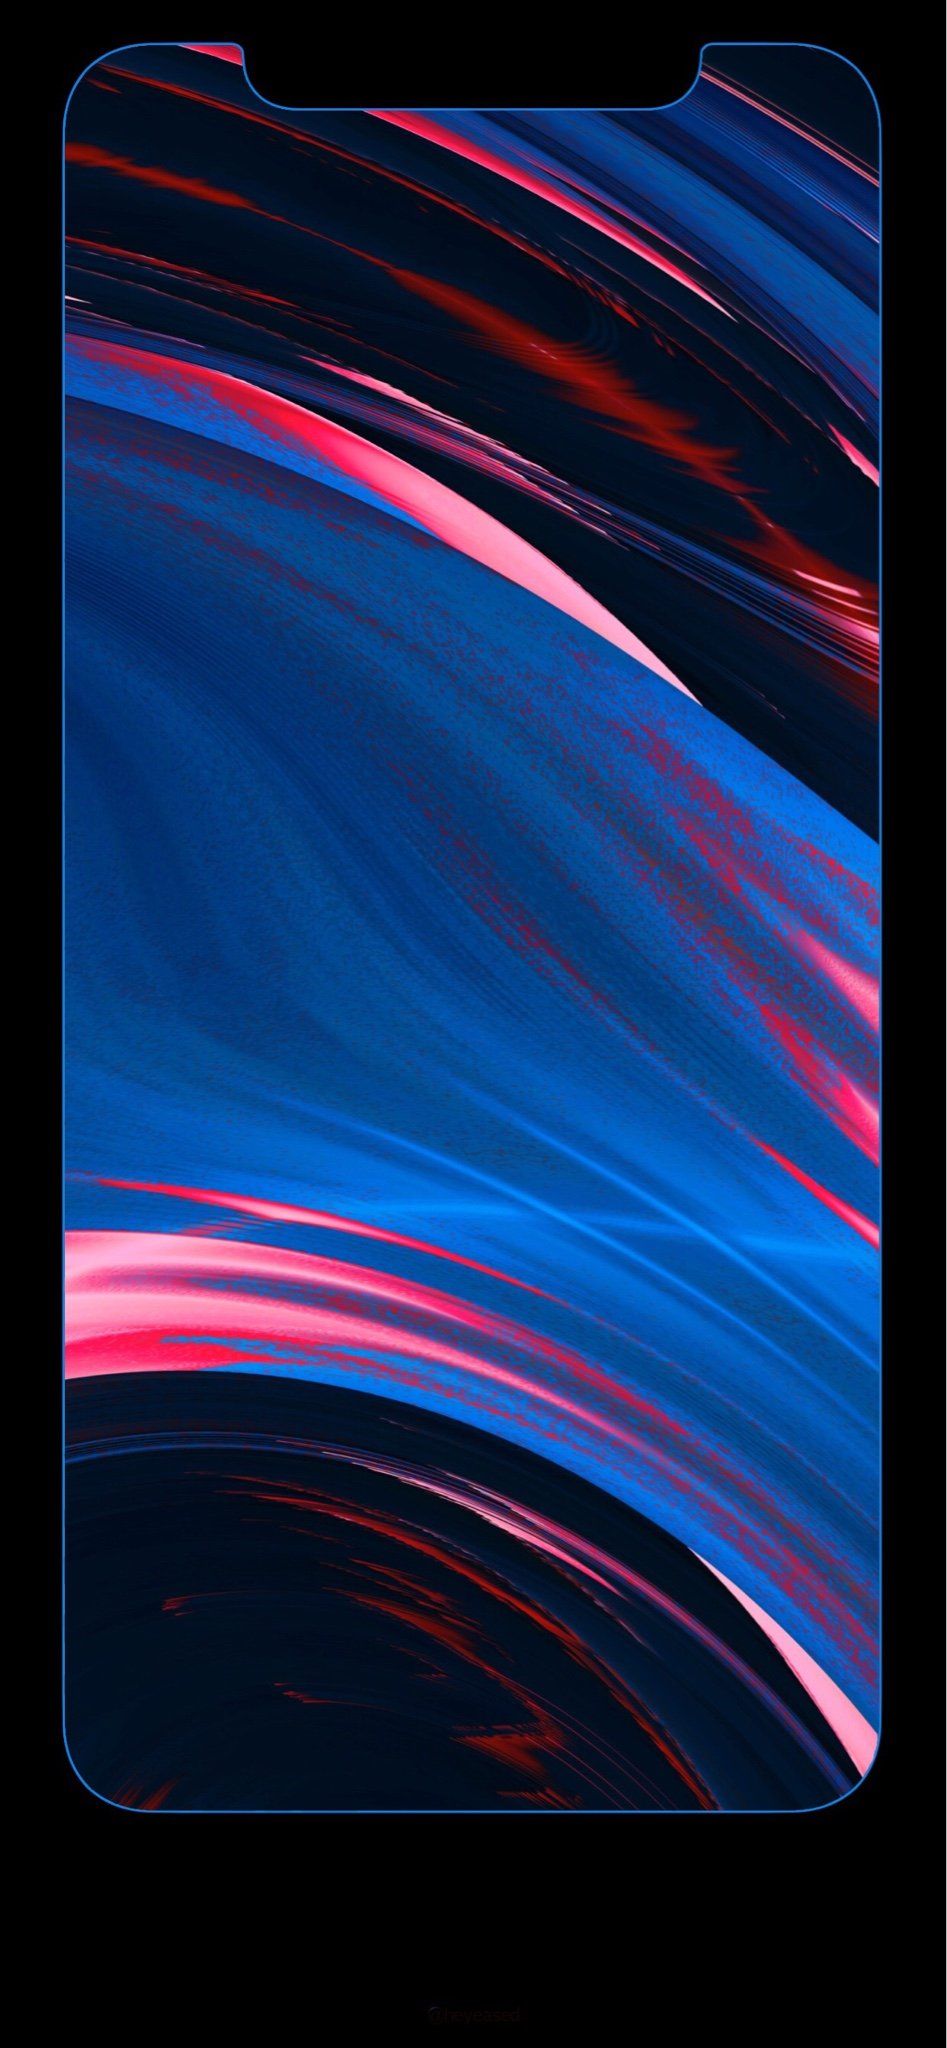 iPhone 12 Pro Max Wallpapers - Wallpaper Cave